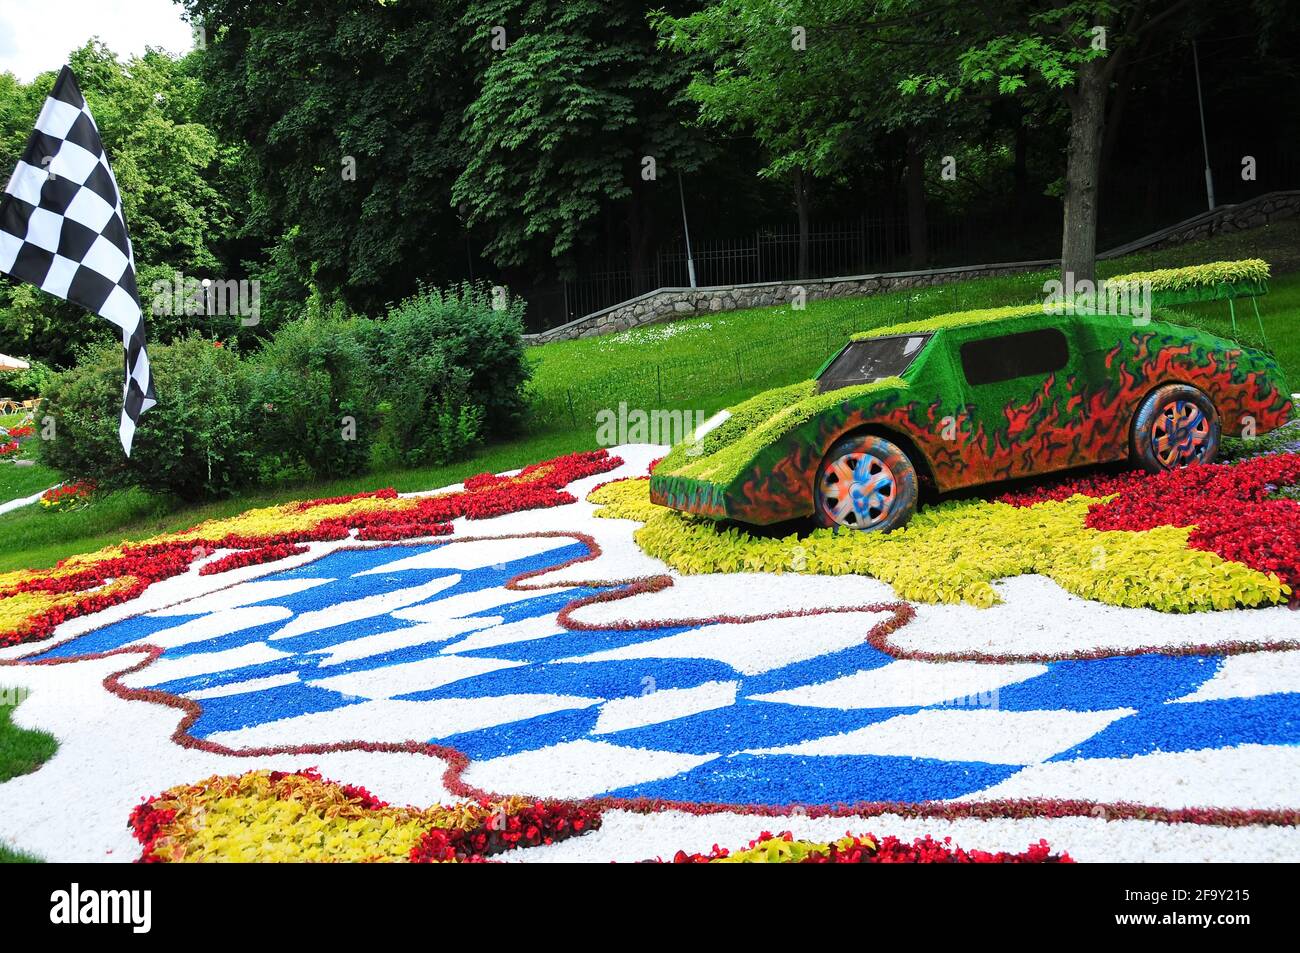 Festival of flowers Landscape design - Cars decorated with flowers on Spyvoche pole park, Kiev, Ukraine Stock Photo